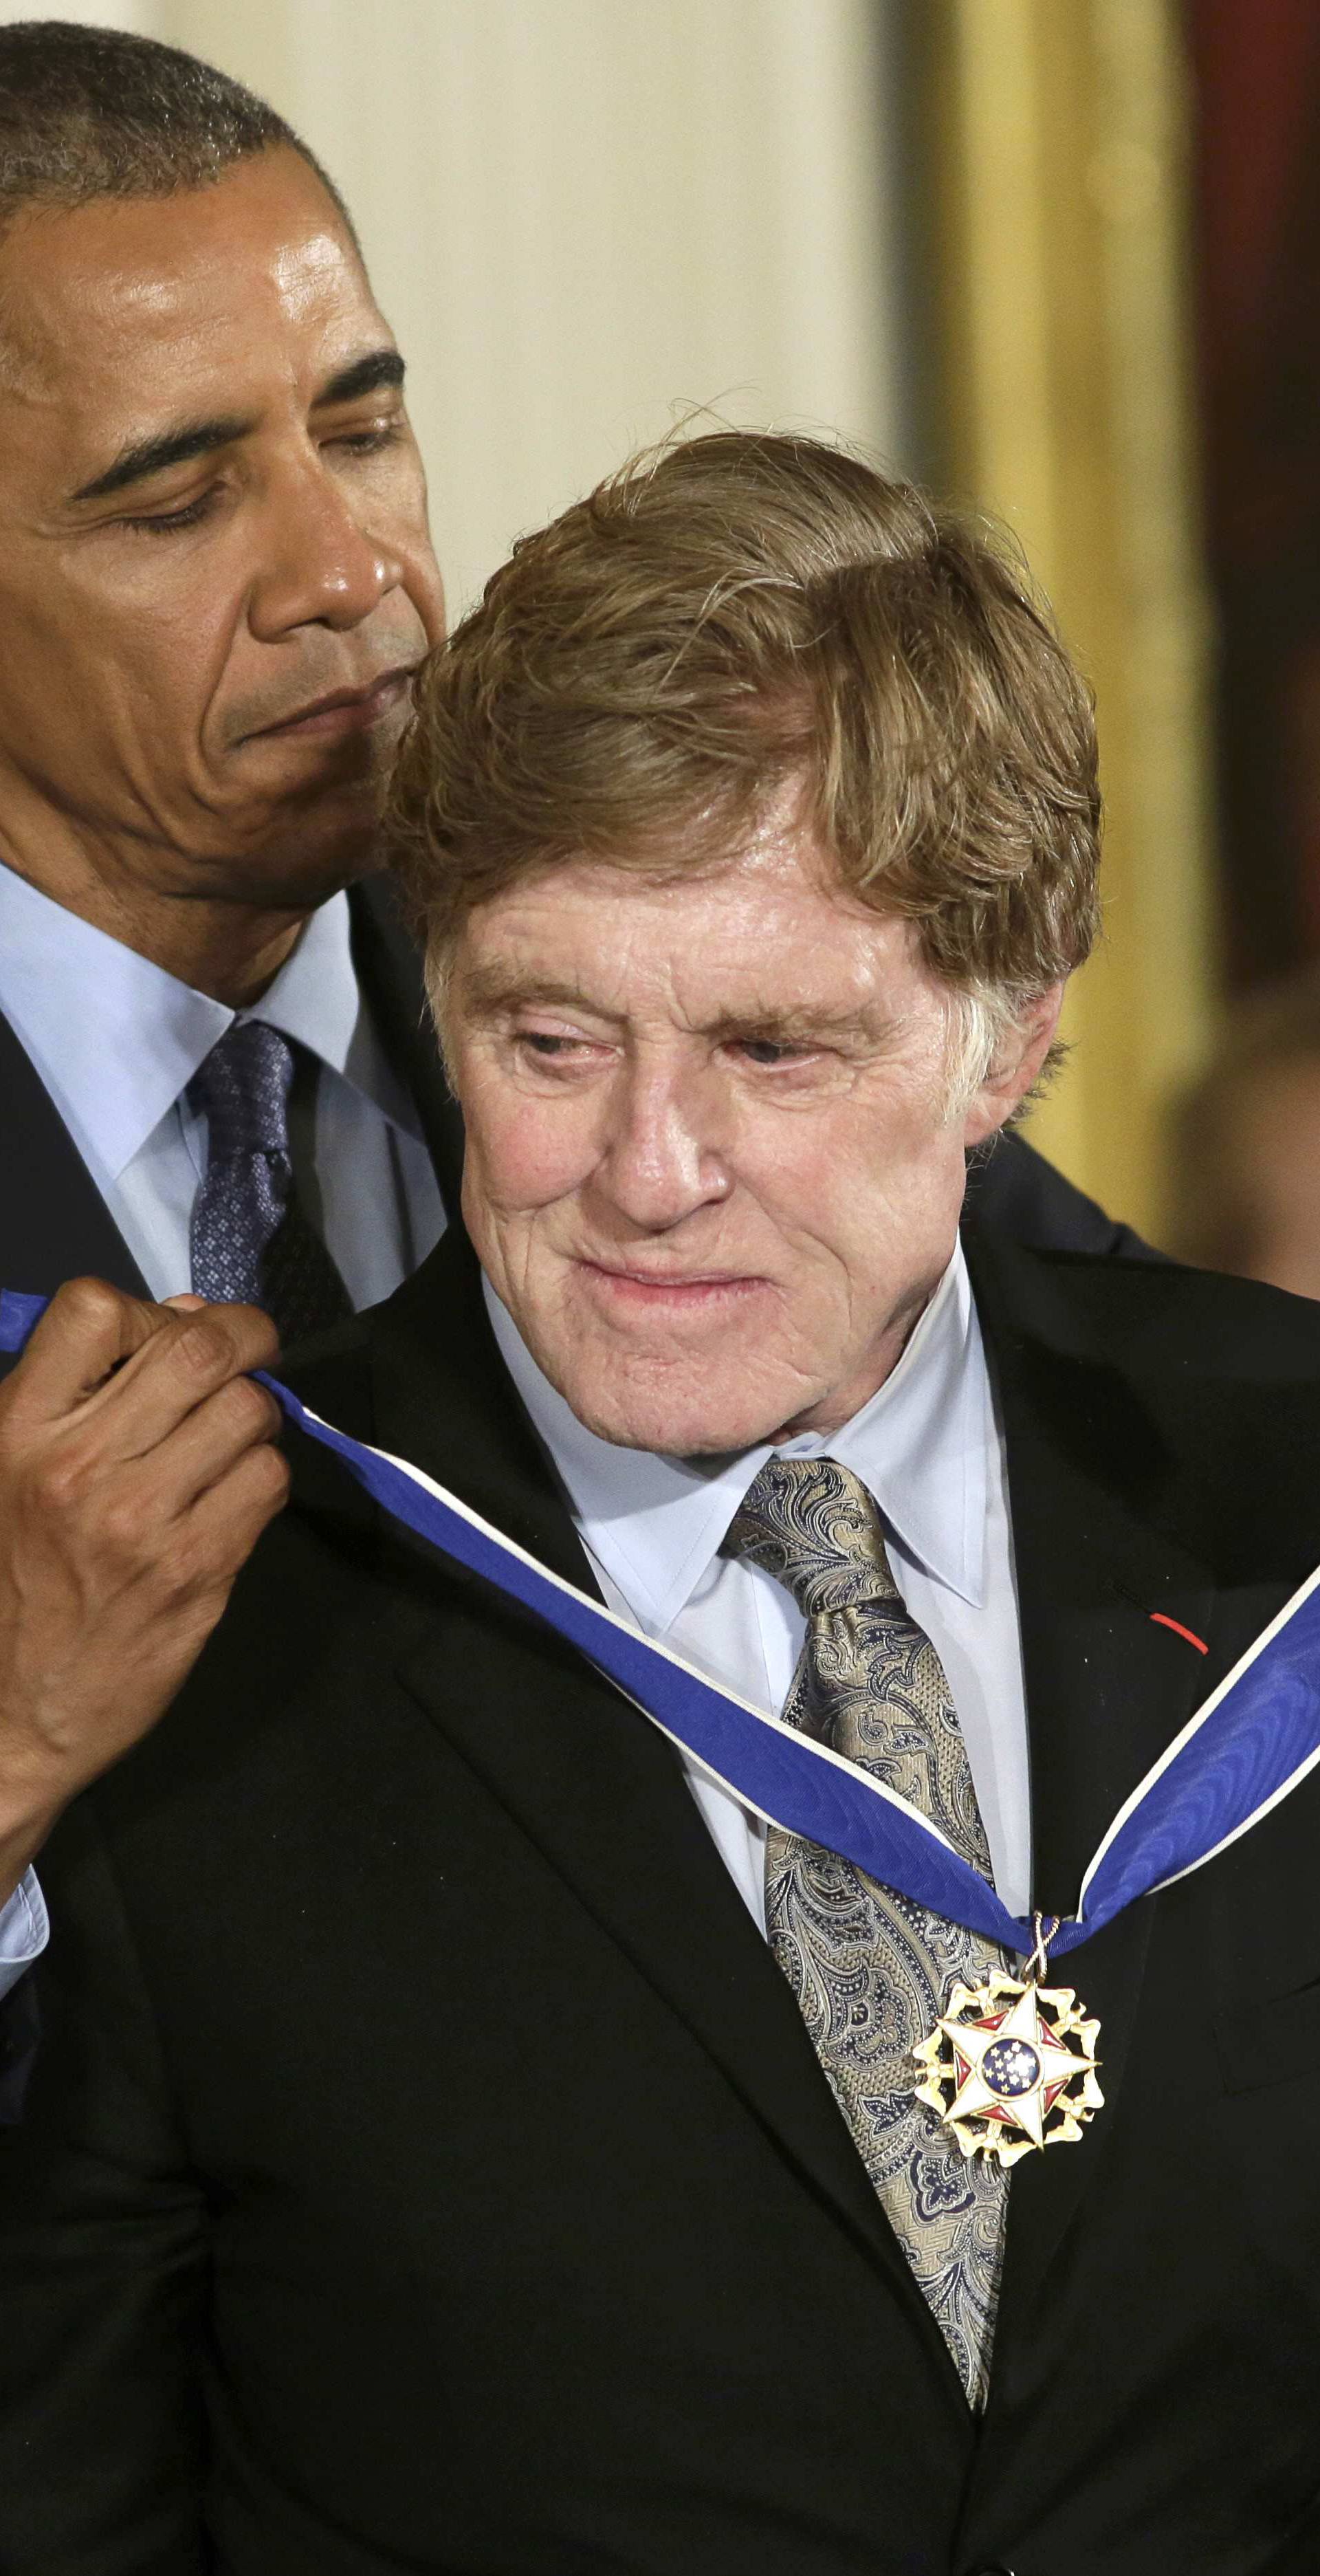 President Obama puts Presidential Medal of Freedom on actor Redford at White House in Washington